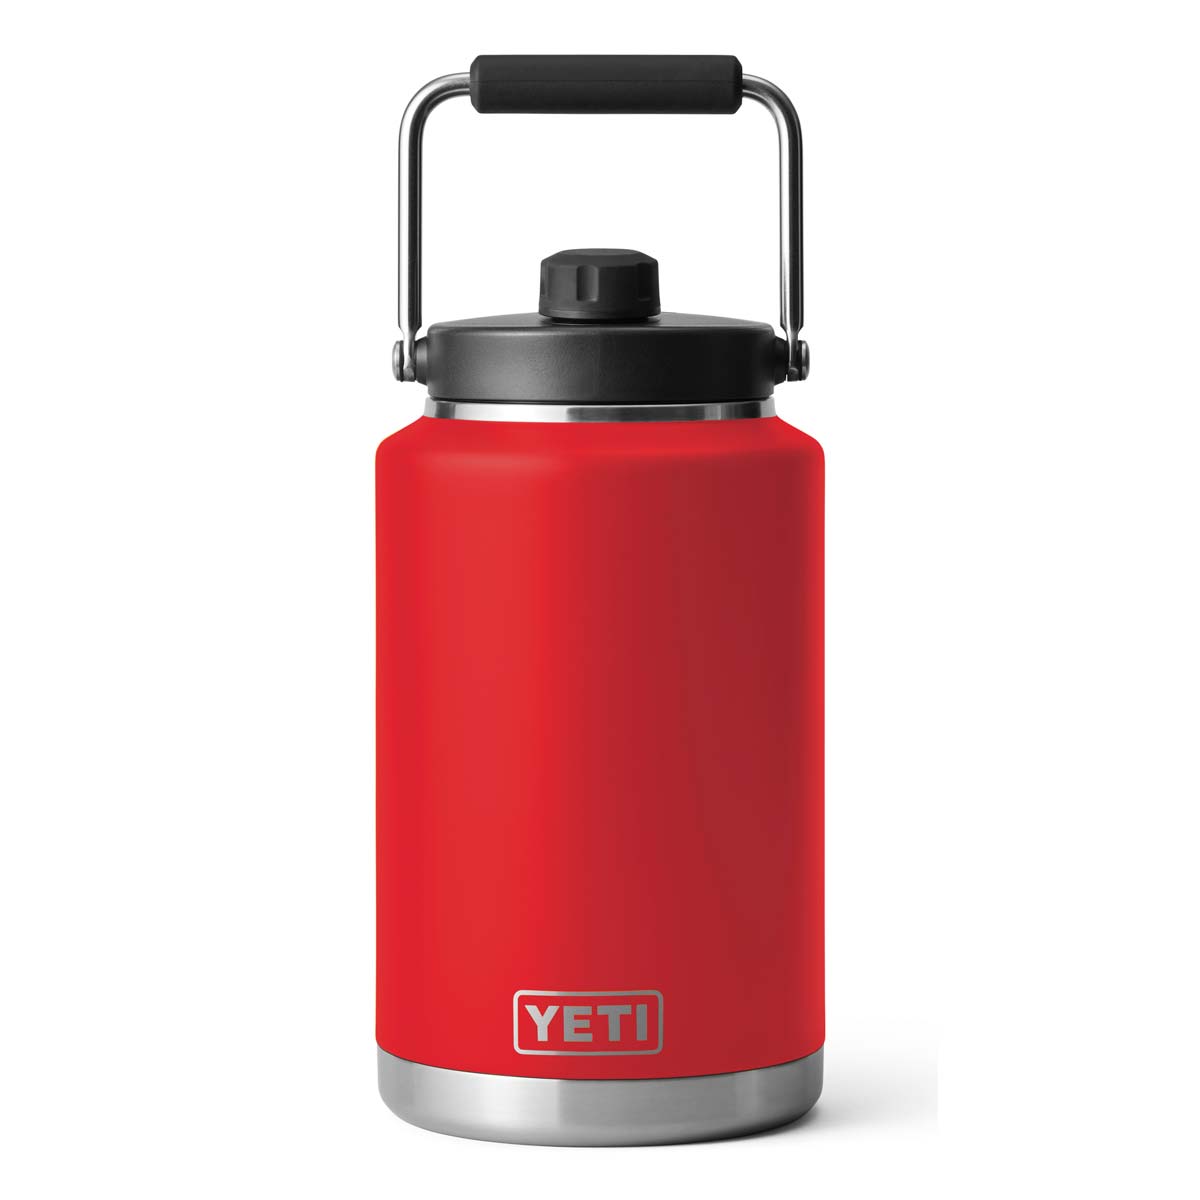 Tomahawk Coffee Thermos Rambler Tumbler Vacuum Insulated with